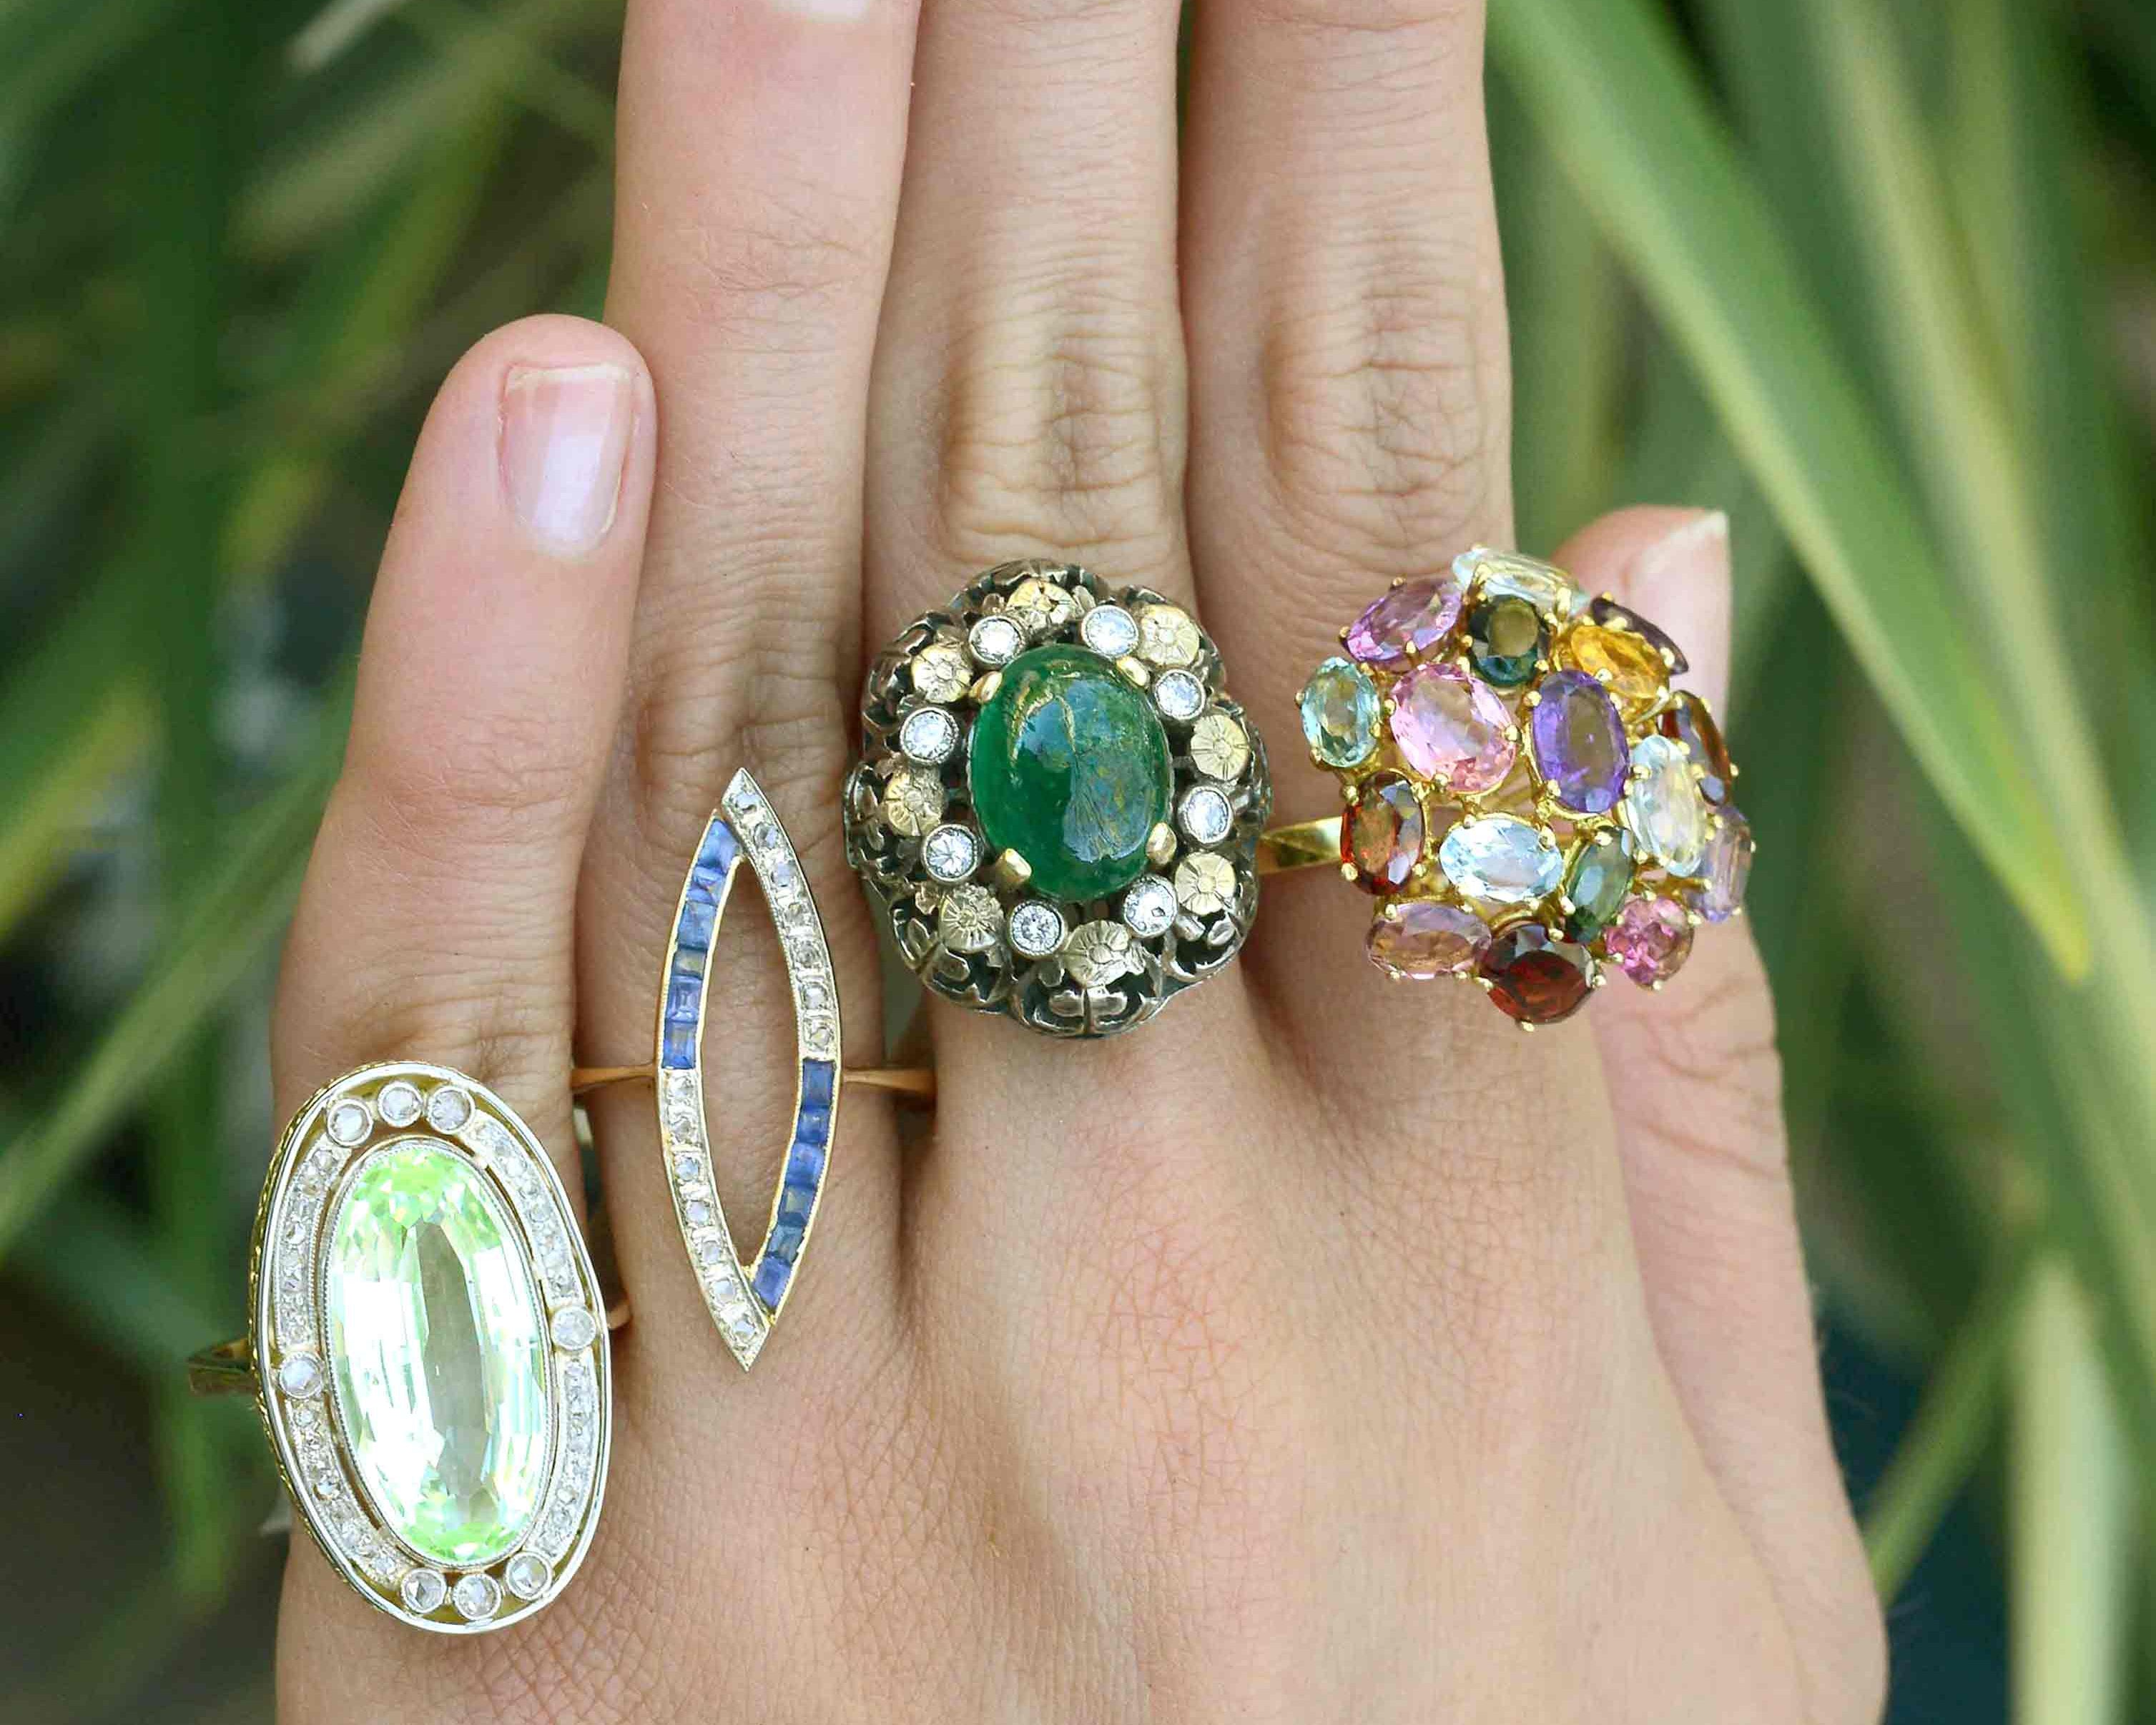 Unique gemstone and diamond cocktail rings.